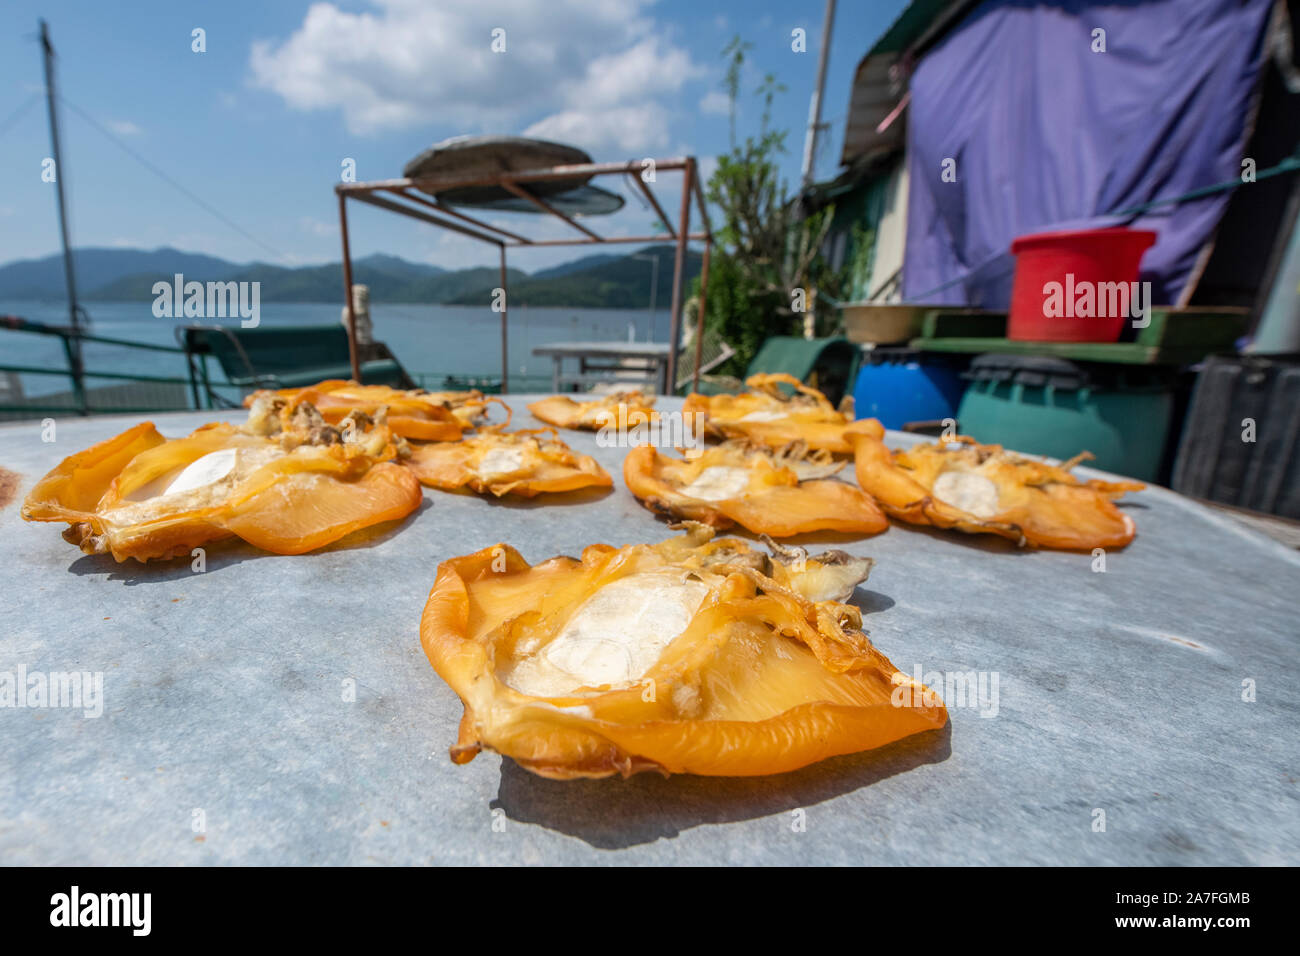 Jellyfish caught in the sea dry in the sun on a table in Tap Mun Island (also known as Grass Island) an outlying island in Hong Kong Stock Photo